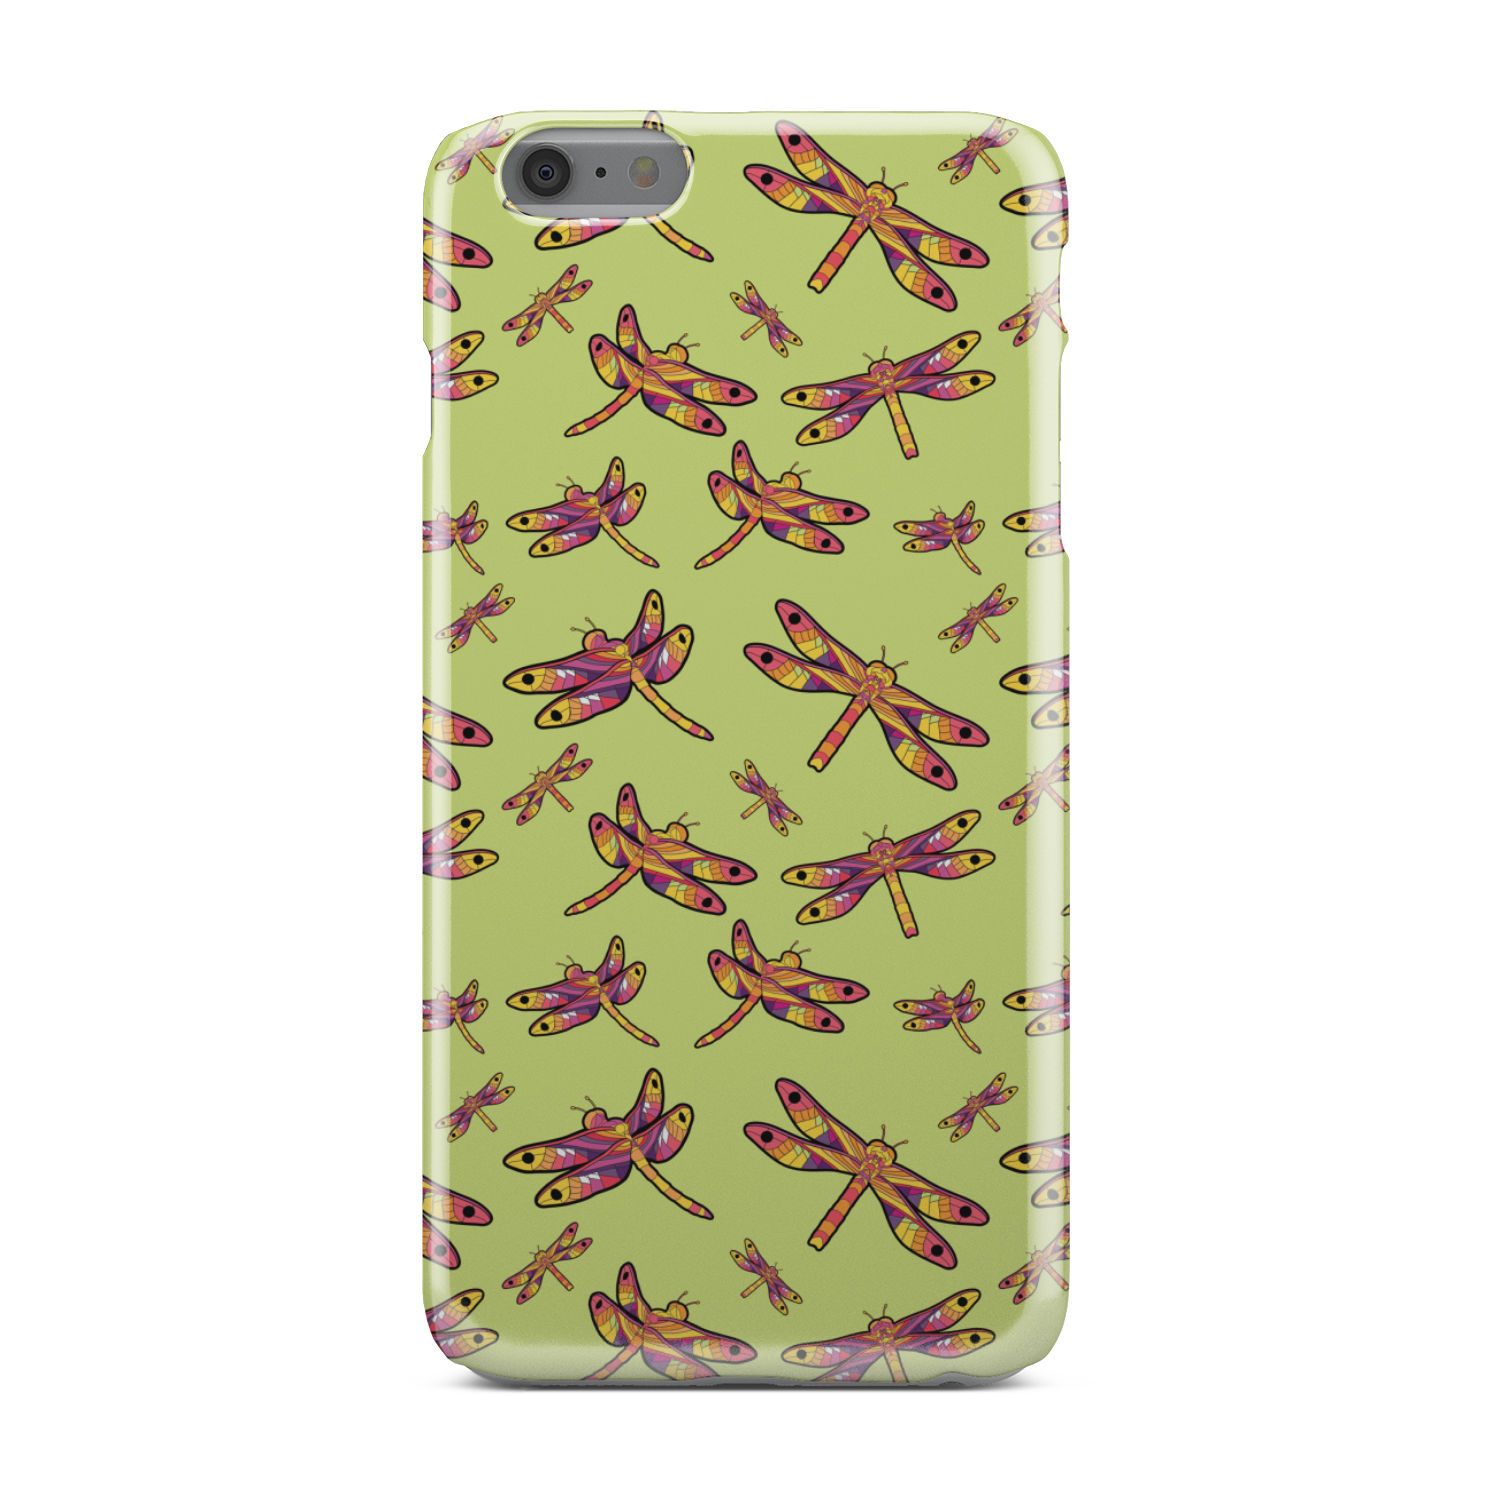 Gathering Lime Phone Case Phone Case wc-fulfillment iPhone 6s Plus 